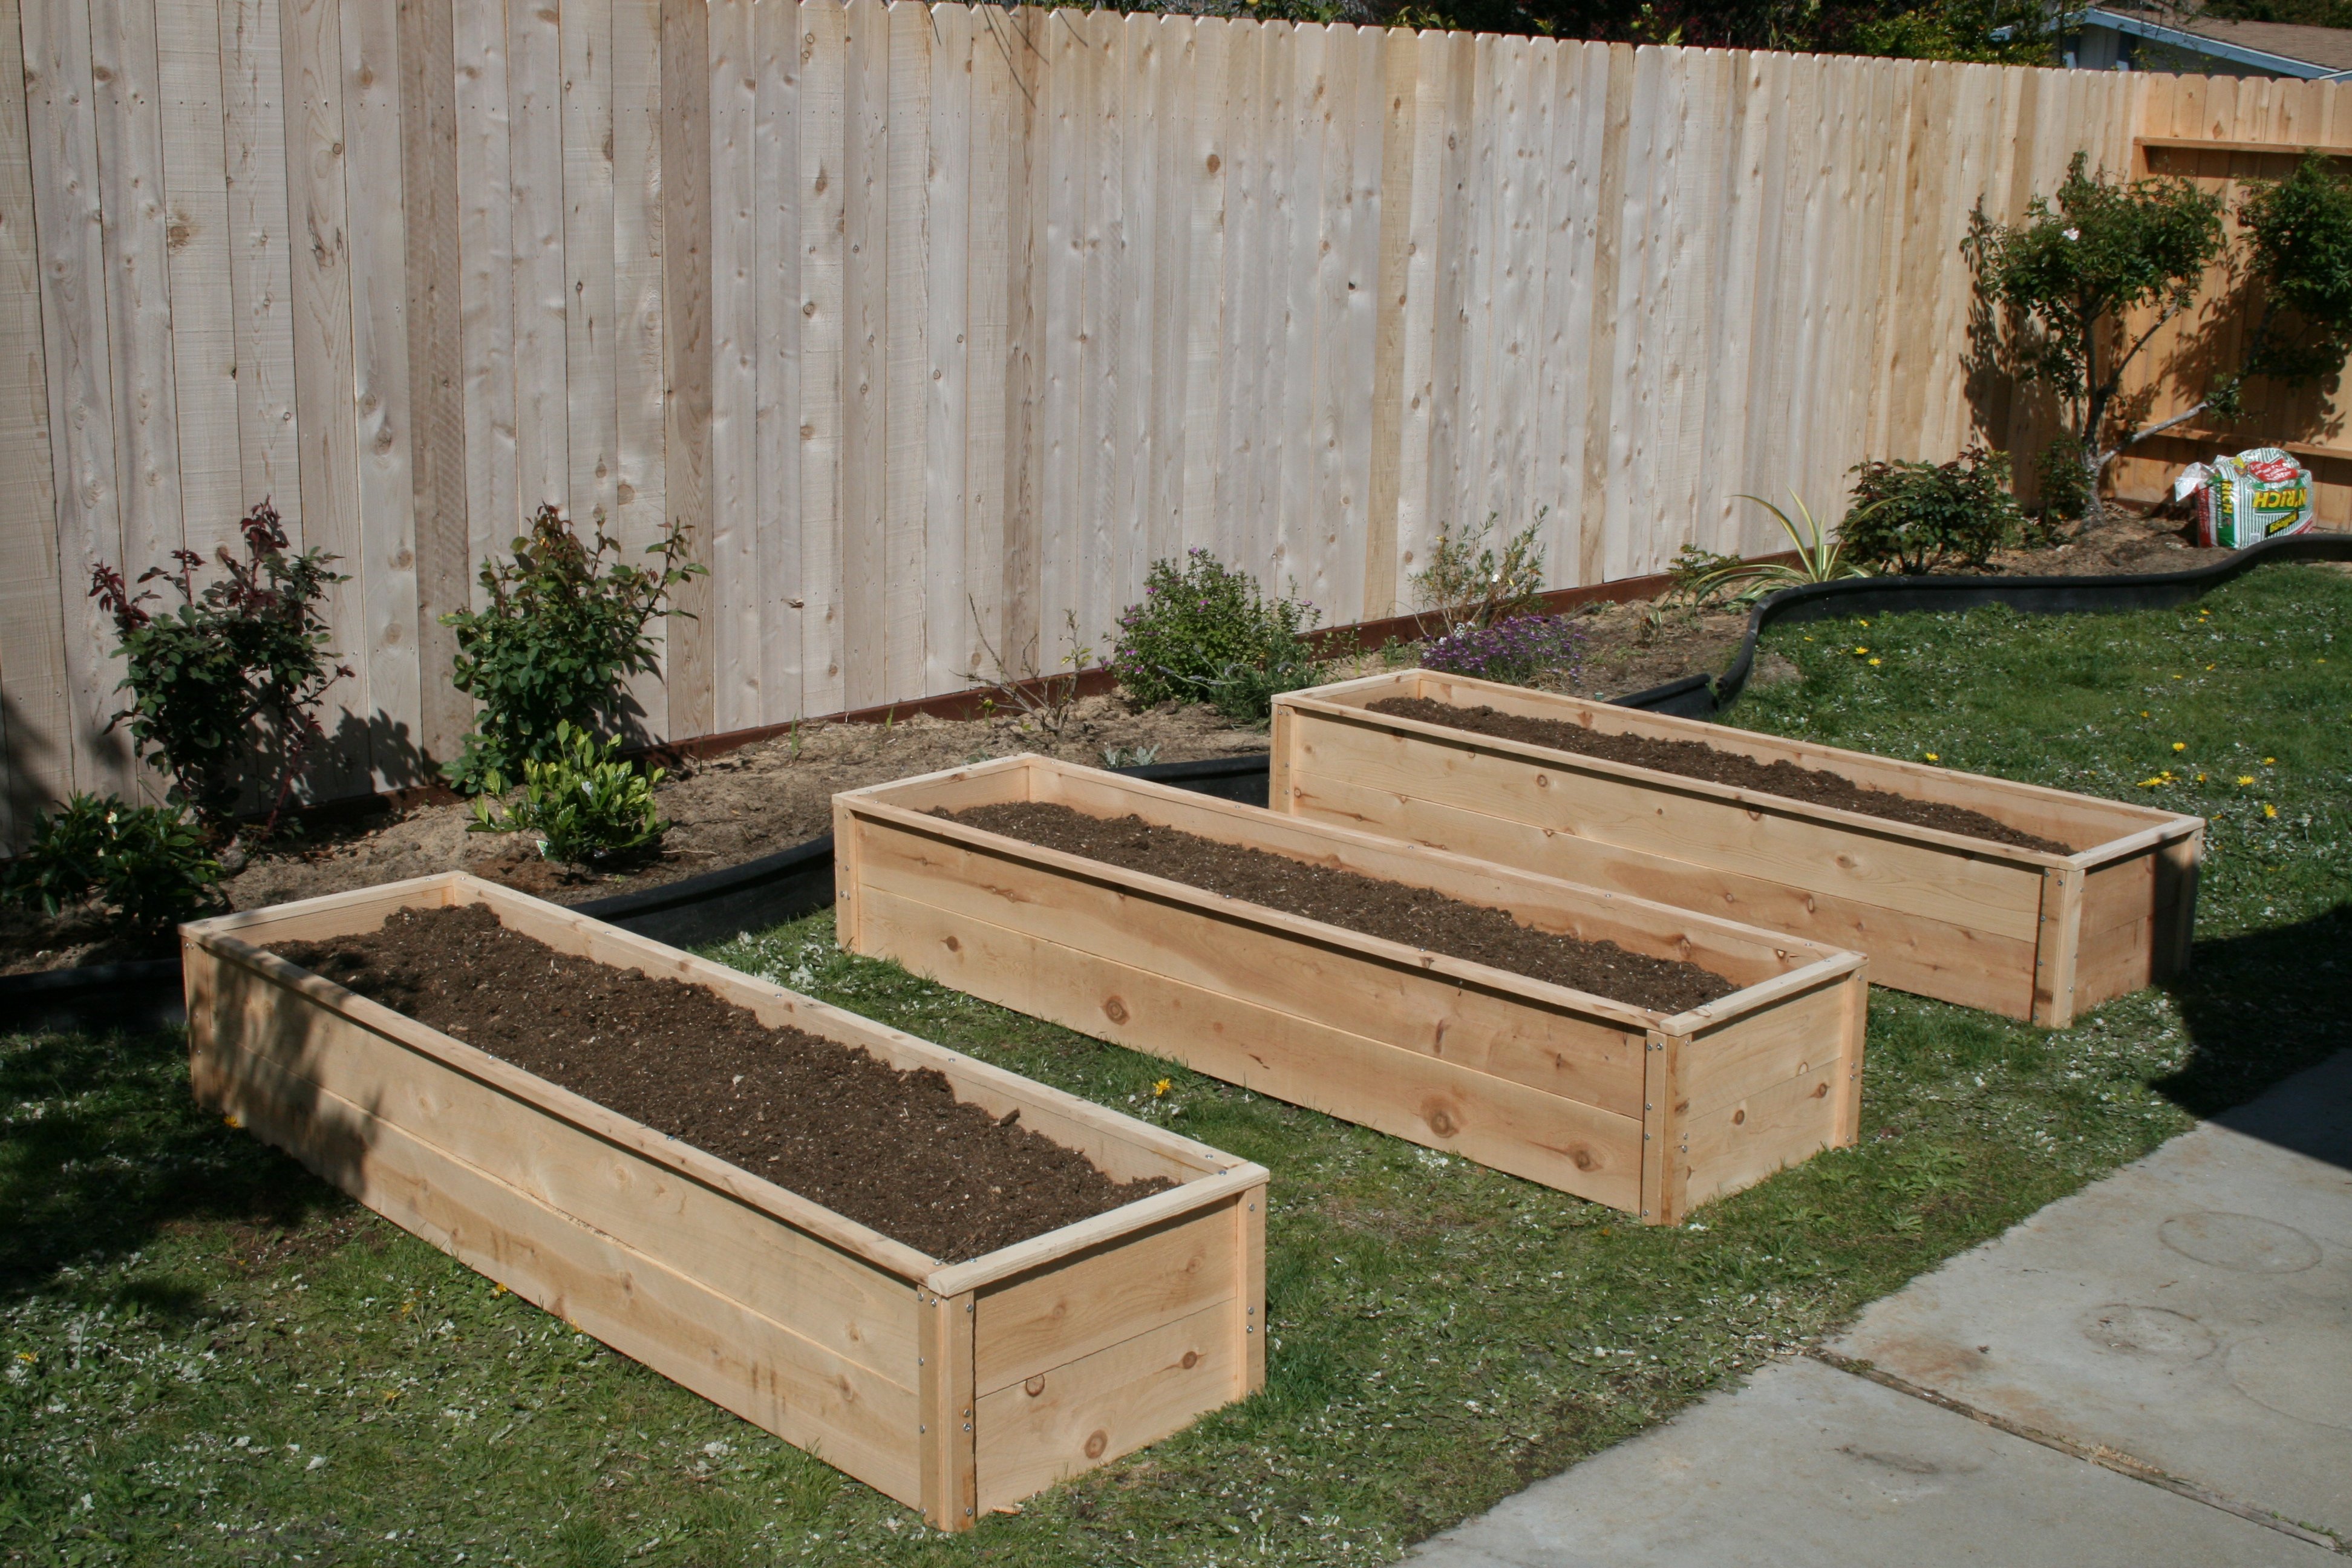 Elevated Do It Yourself Elevated Raised Garden Bed Plans Raised Garden Beds Organic